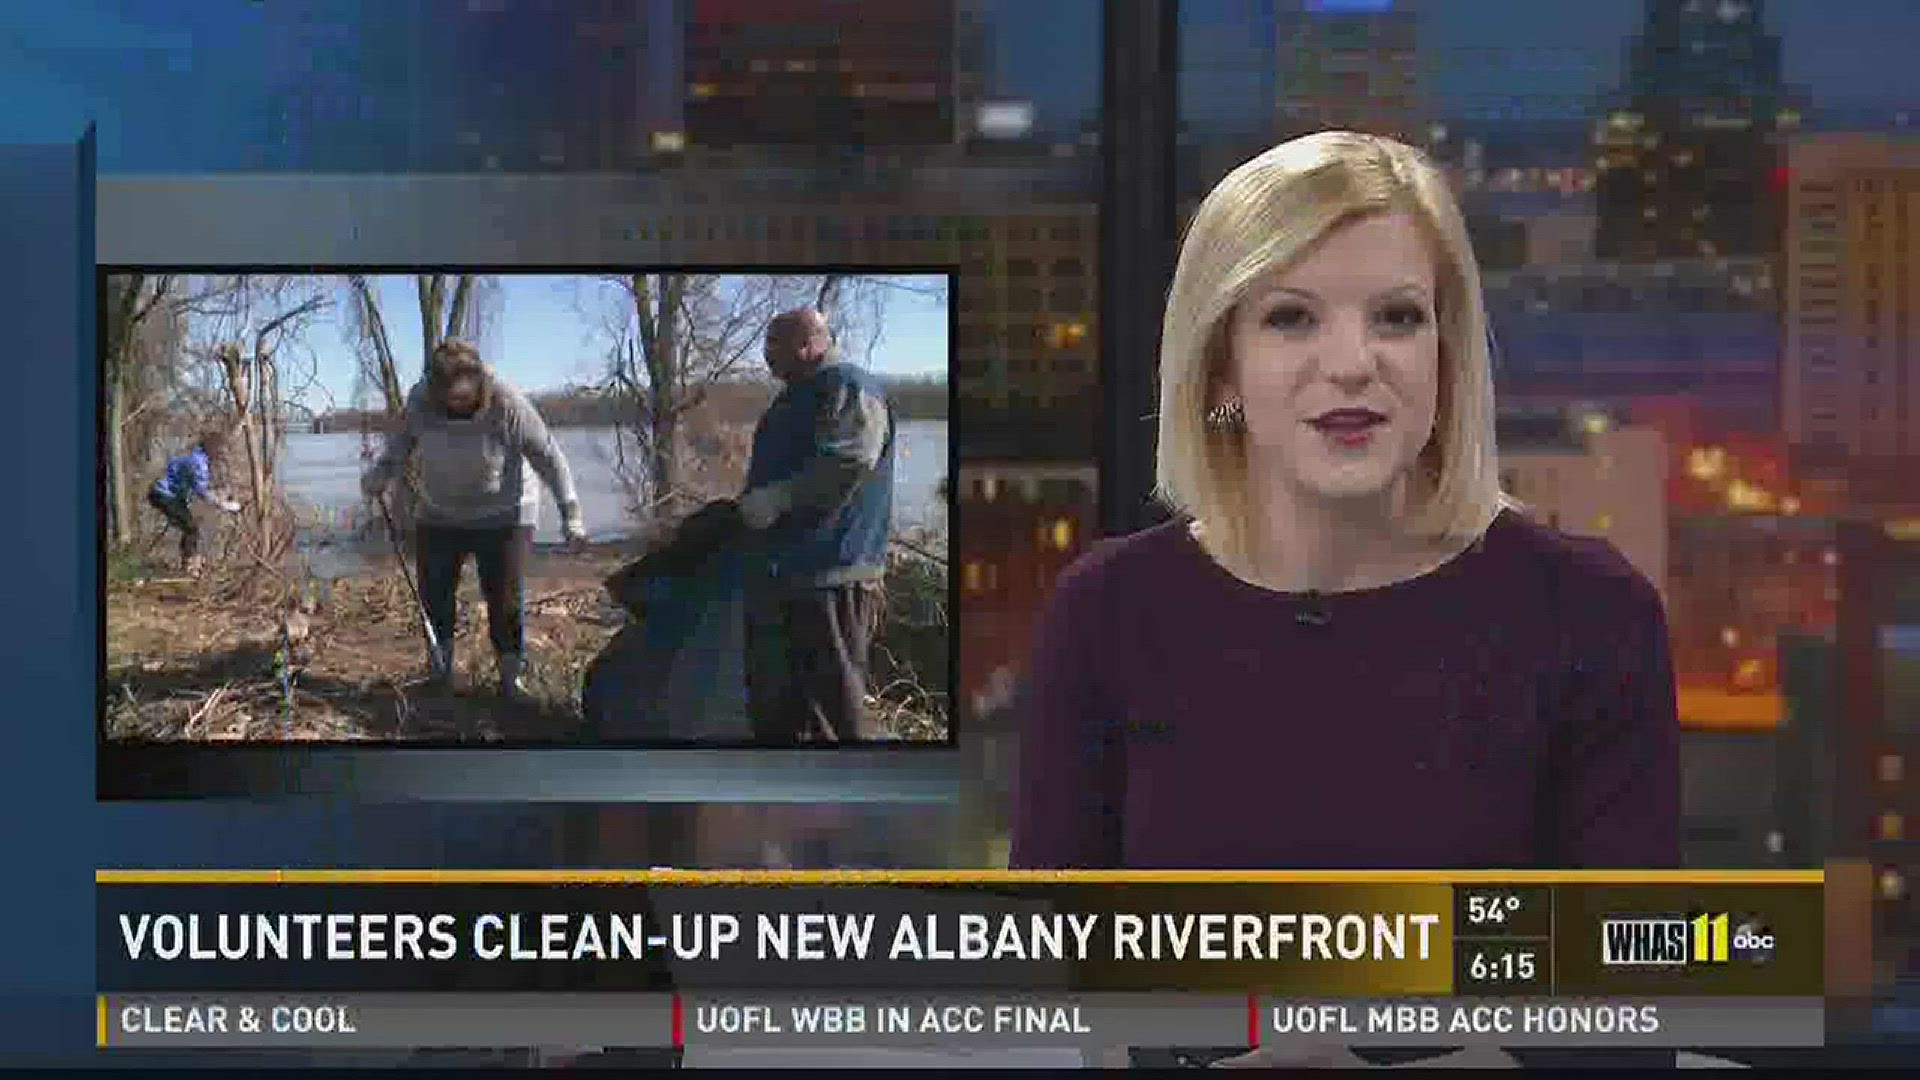 Dozens of volunteers helped with cleanup efforts at the New Albany Riverfront just a week after floodwaters filled the area.